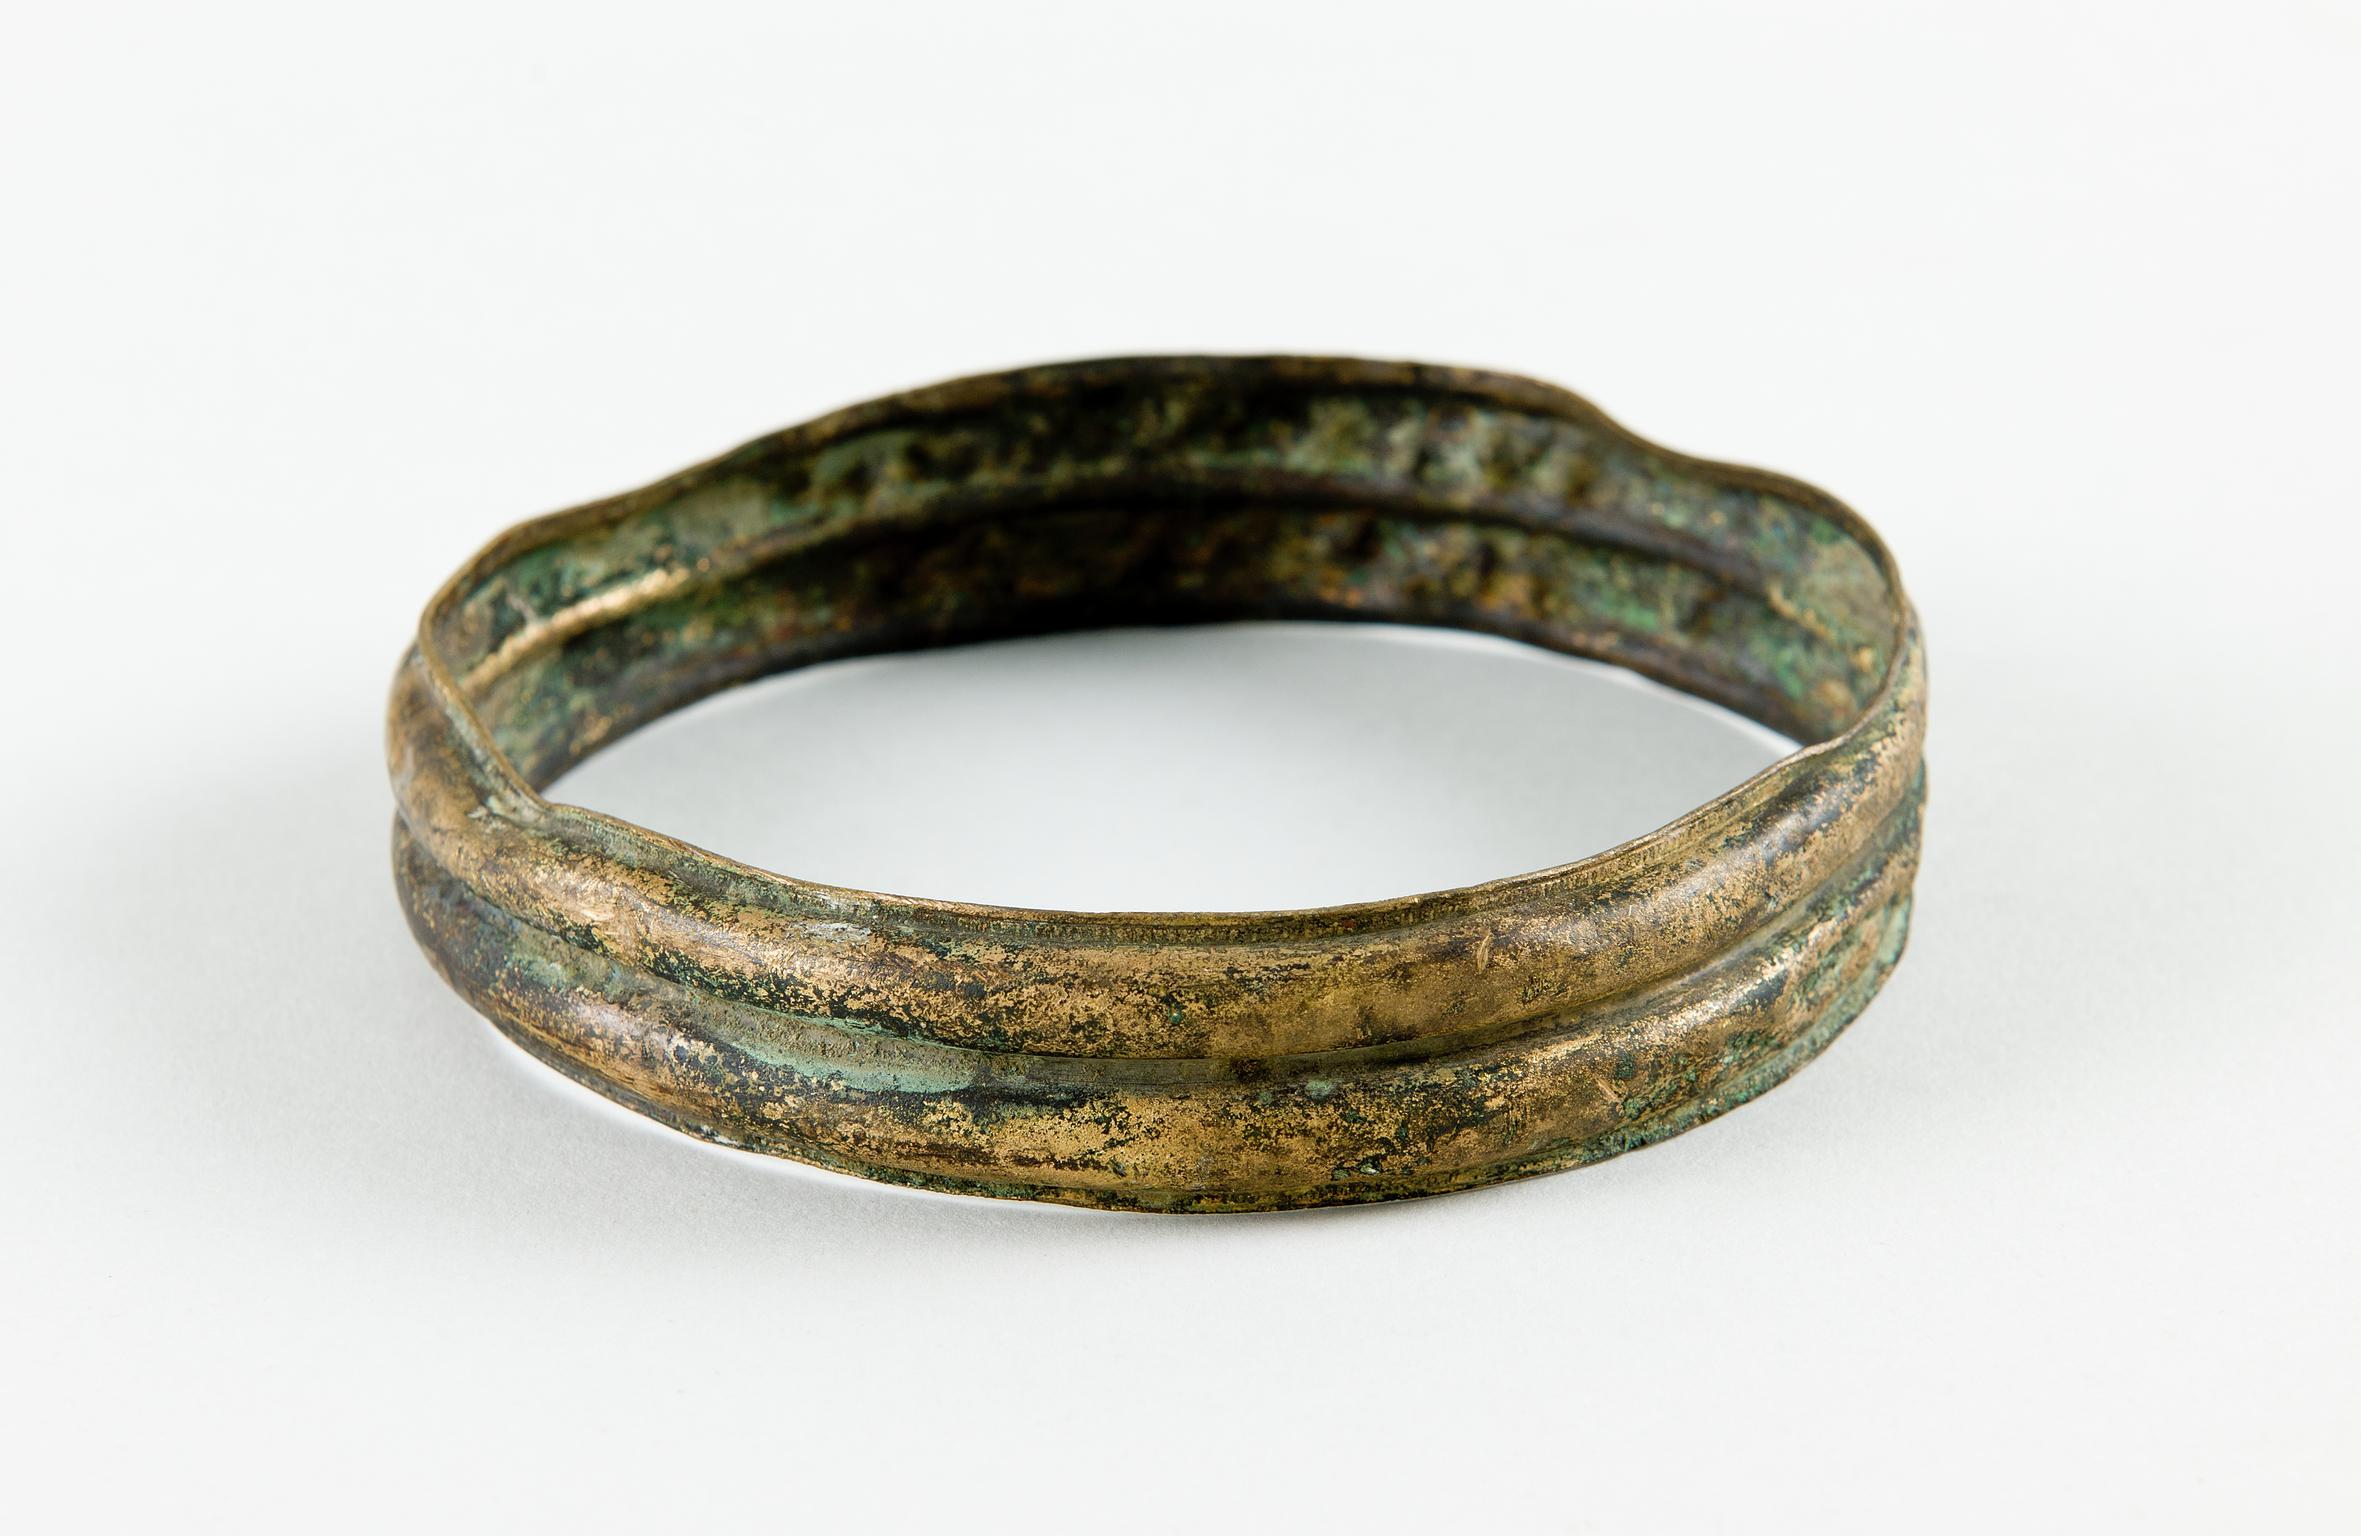 Iron Age copper alloy nave hoop